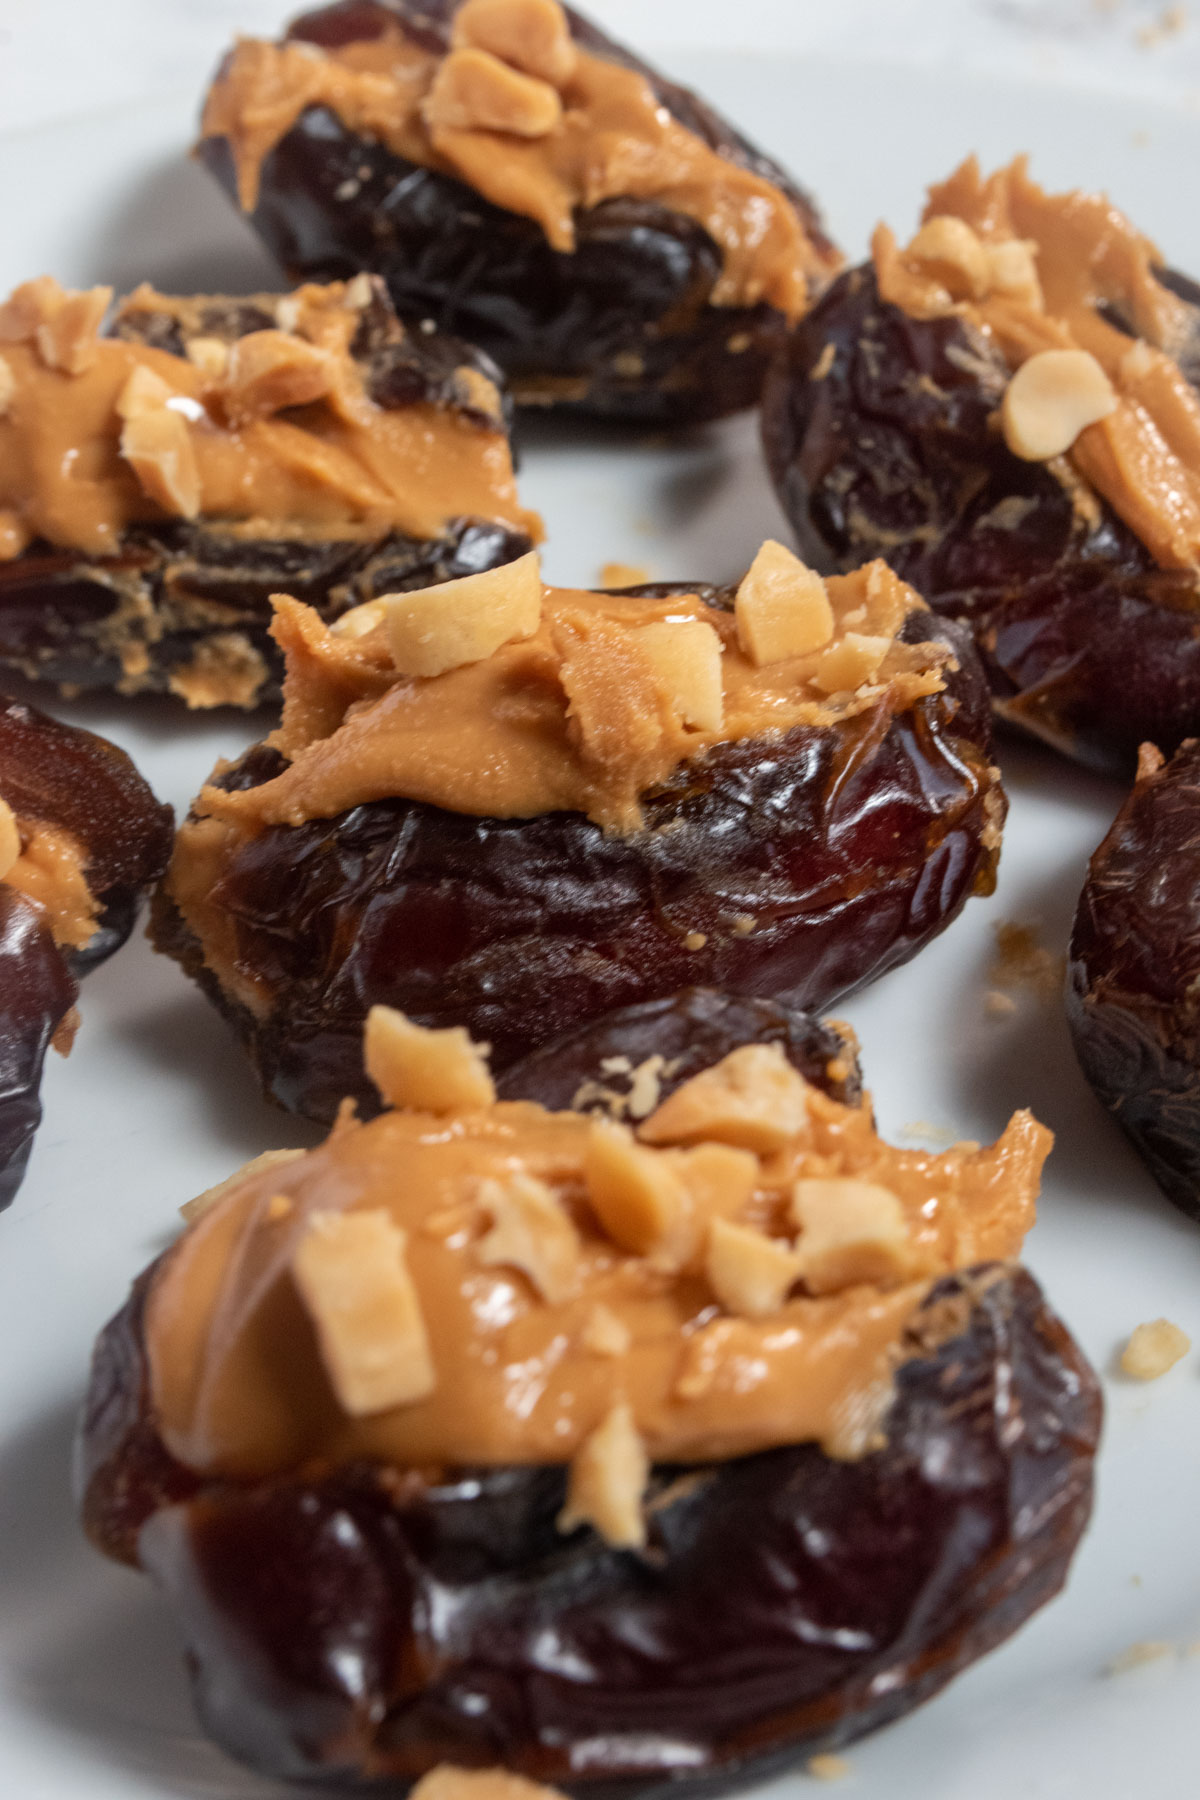 Seven peanut butter stuffed dates without a chocolate topping waiting for some chocolate drizzle. 